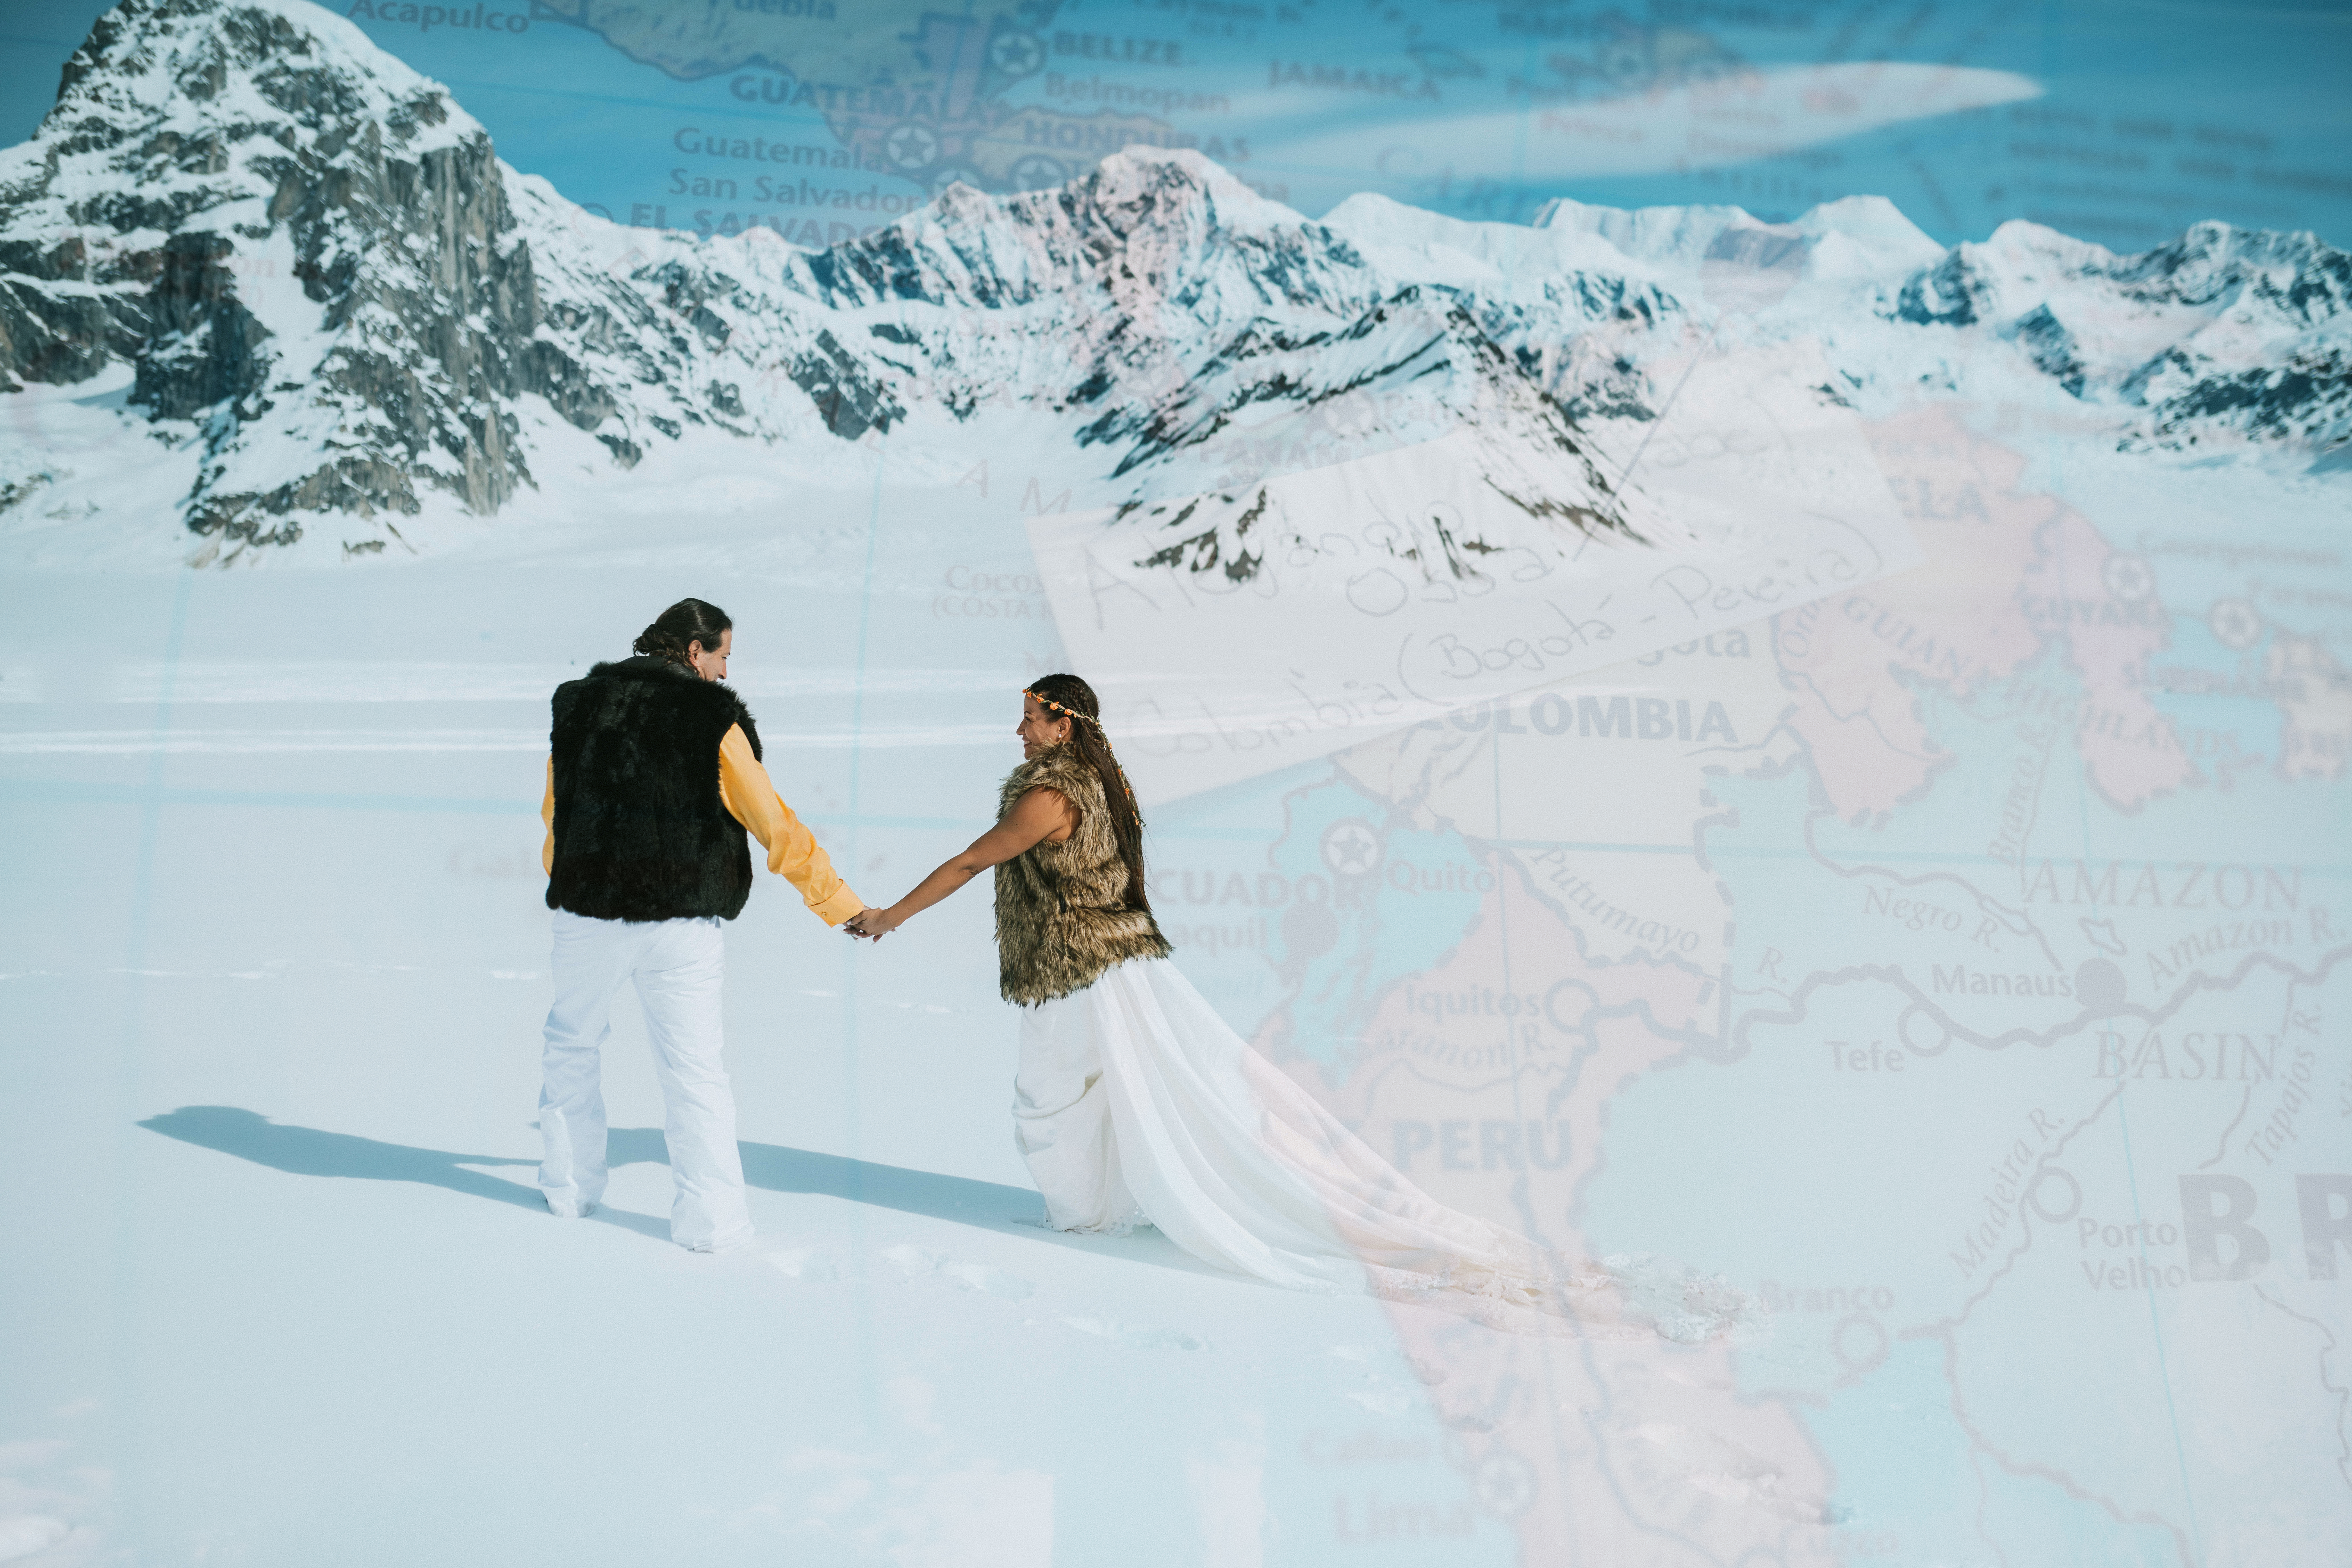 Bride and groom holding hands as groom leads the way across the pristine snow on the glacier, the image is overlaid by a map of Colombia with their names and a pin to mark where they are from